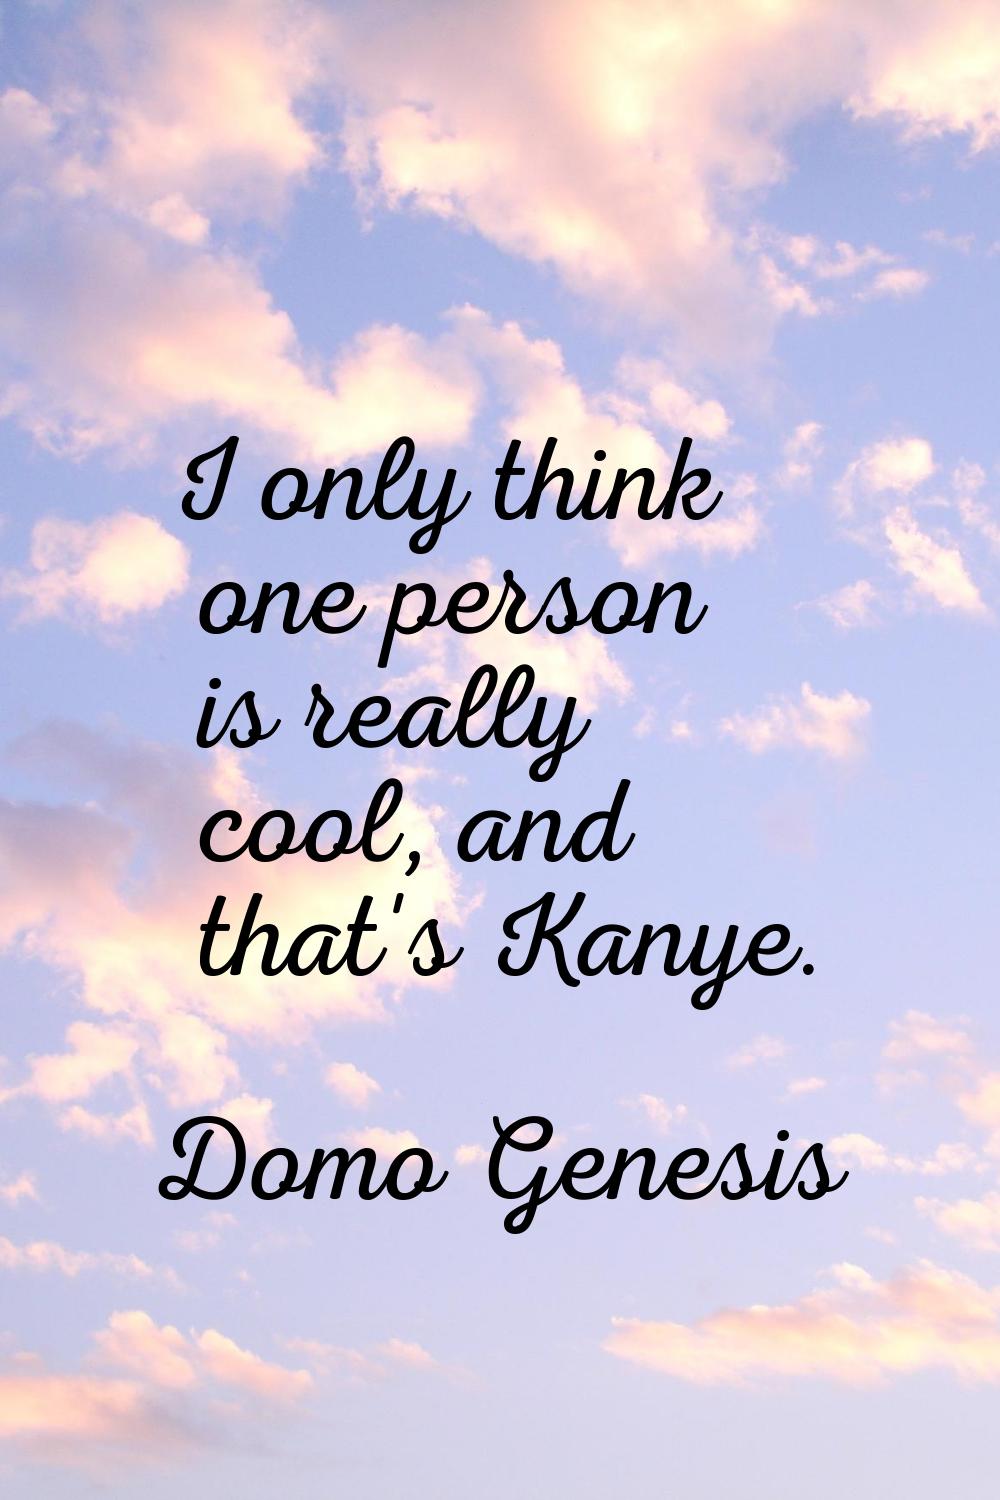 I only think one person is really cool, and that's Kanye.